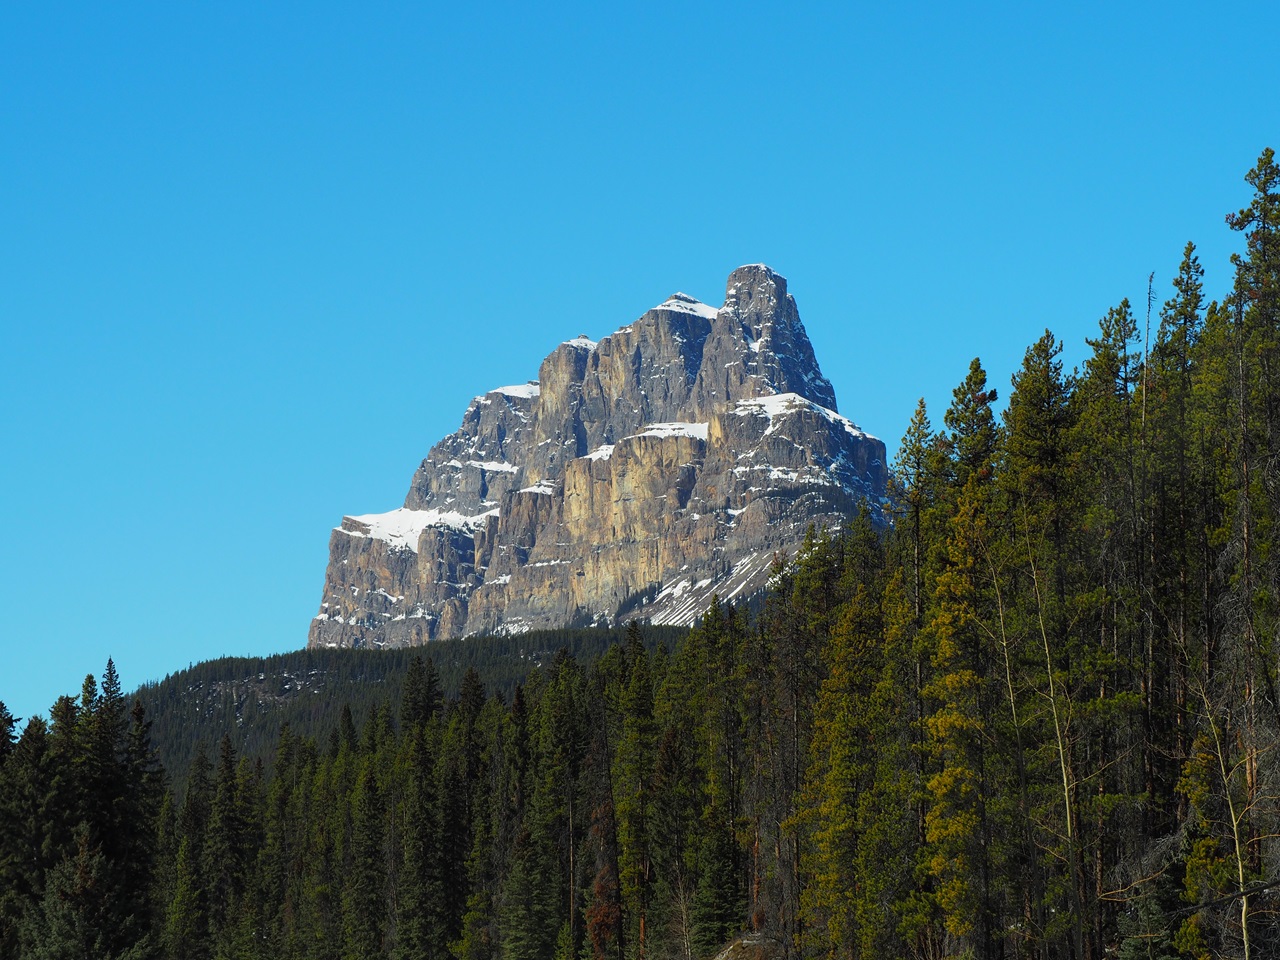 A view of Castle Mountain from the Bow Valley Parkway (Hwy 1A), Banff National Park, March 17, 2024. Photograph: Malik Merchant/Simerg Photos.